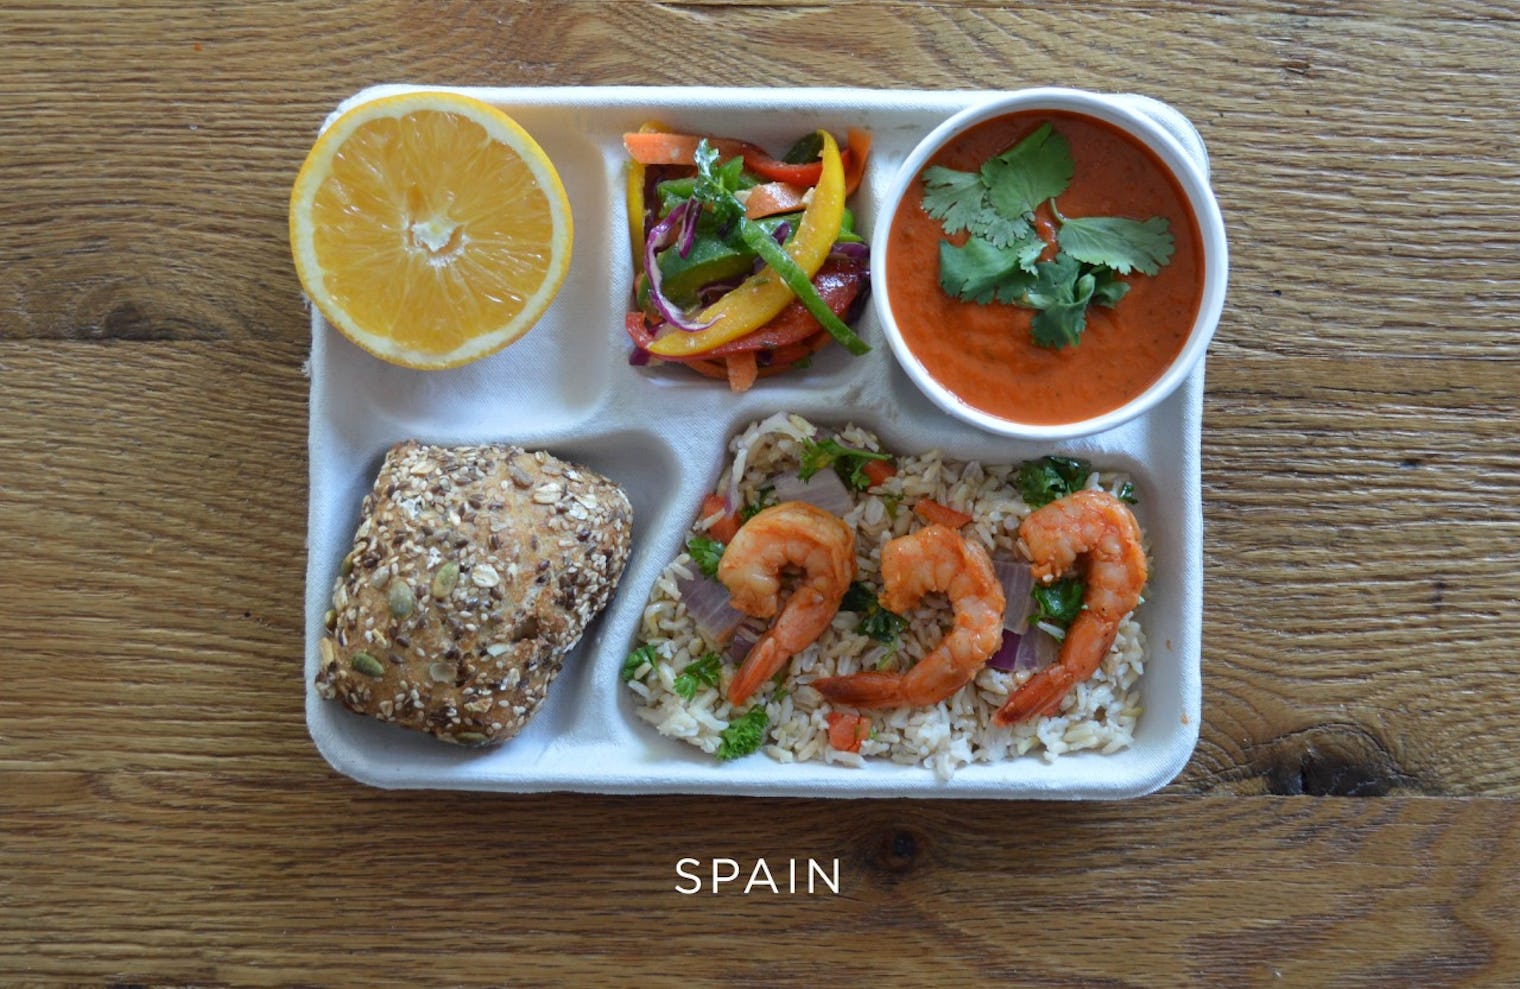 these-pictures-of-school-lunches-around-the-world-will-make-you-both-very-hungry-and-very-sad